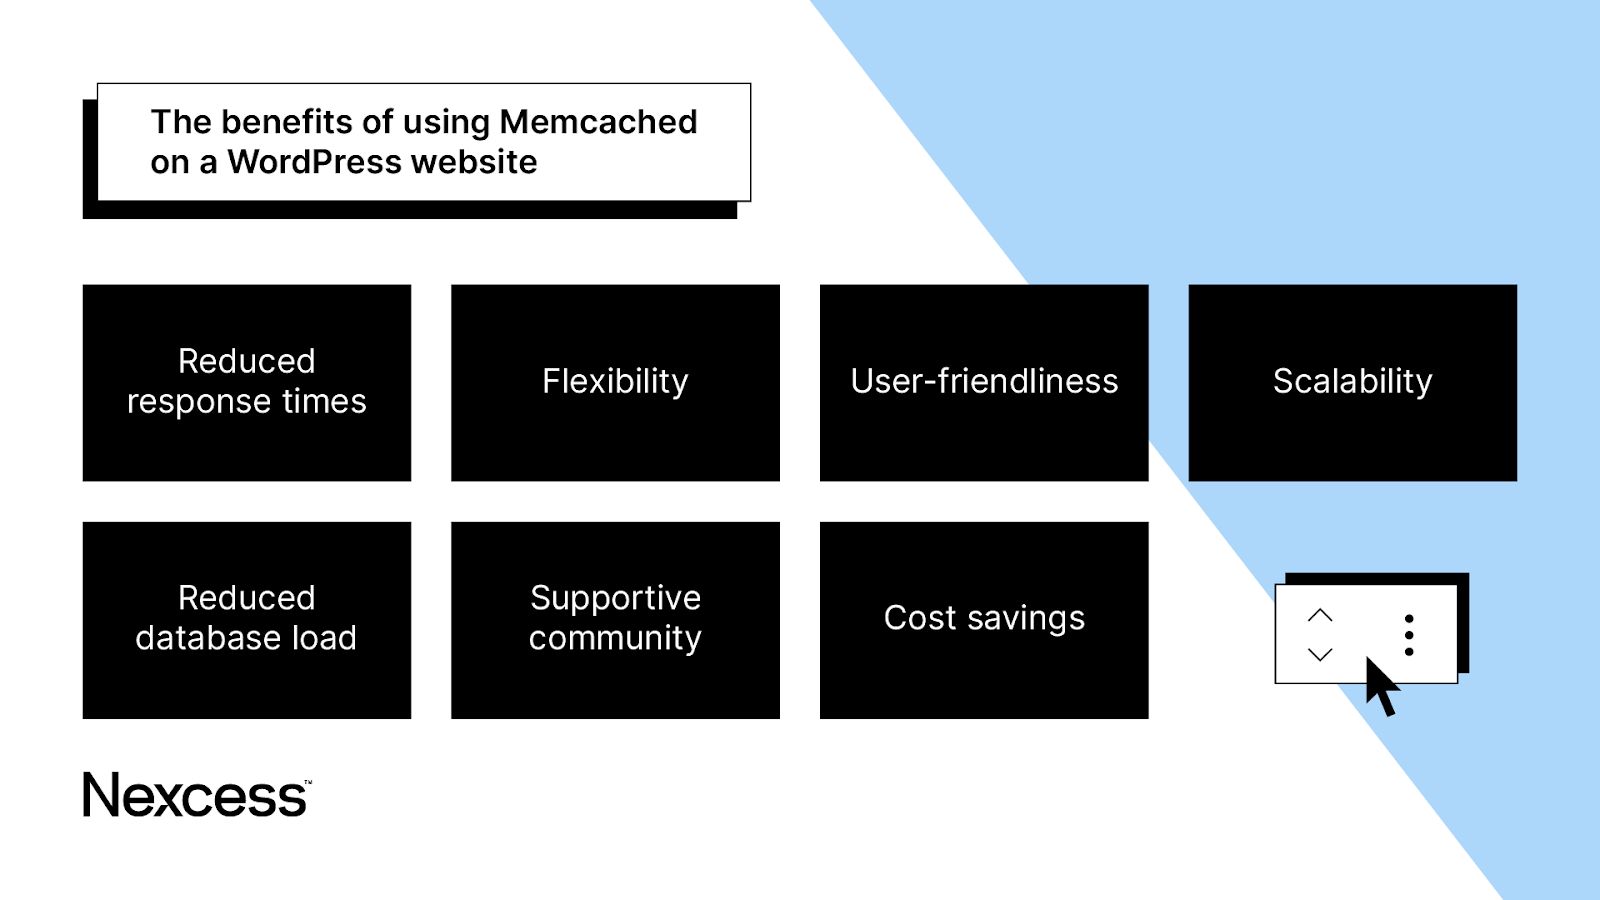 The benefits of using Memcached on your WordPress site.